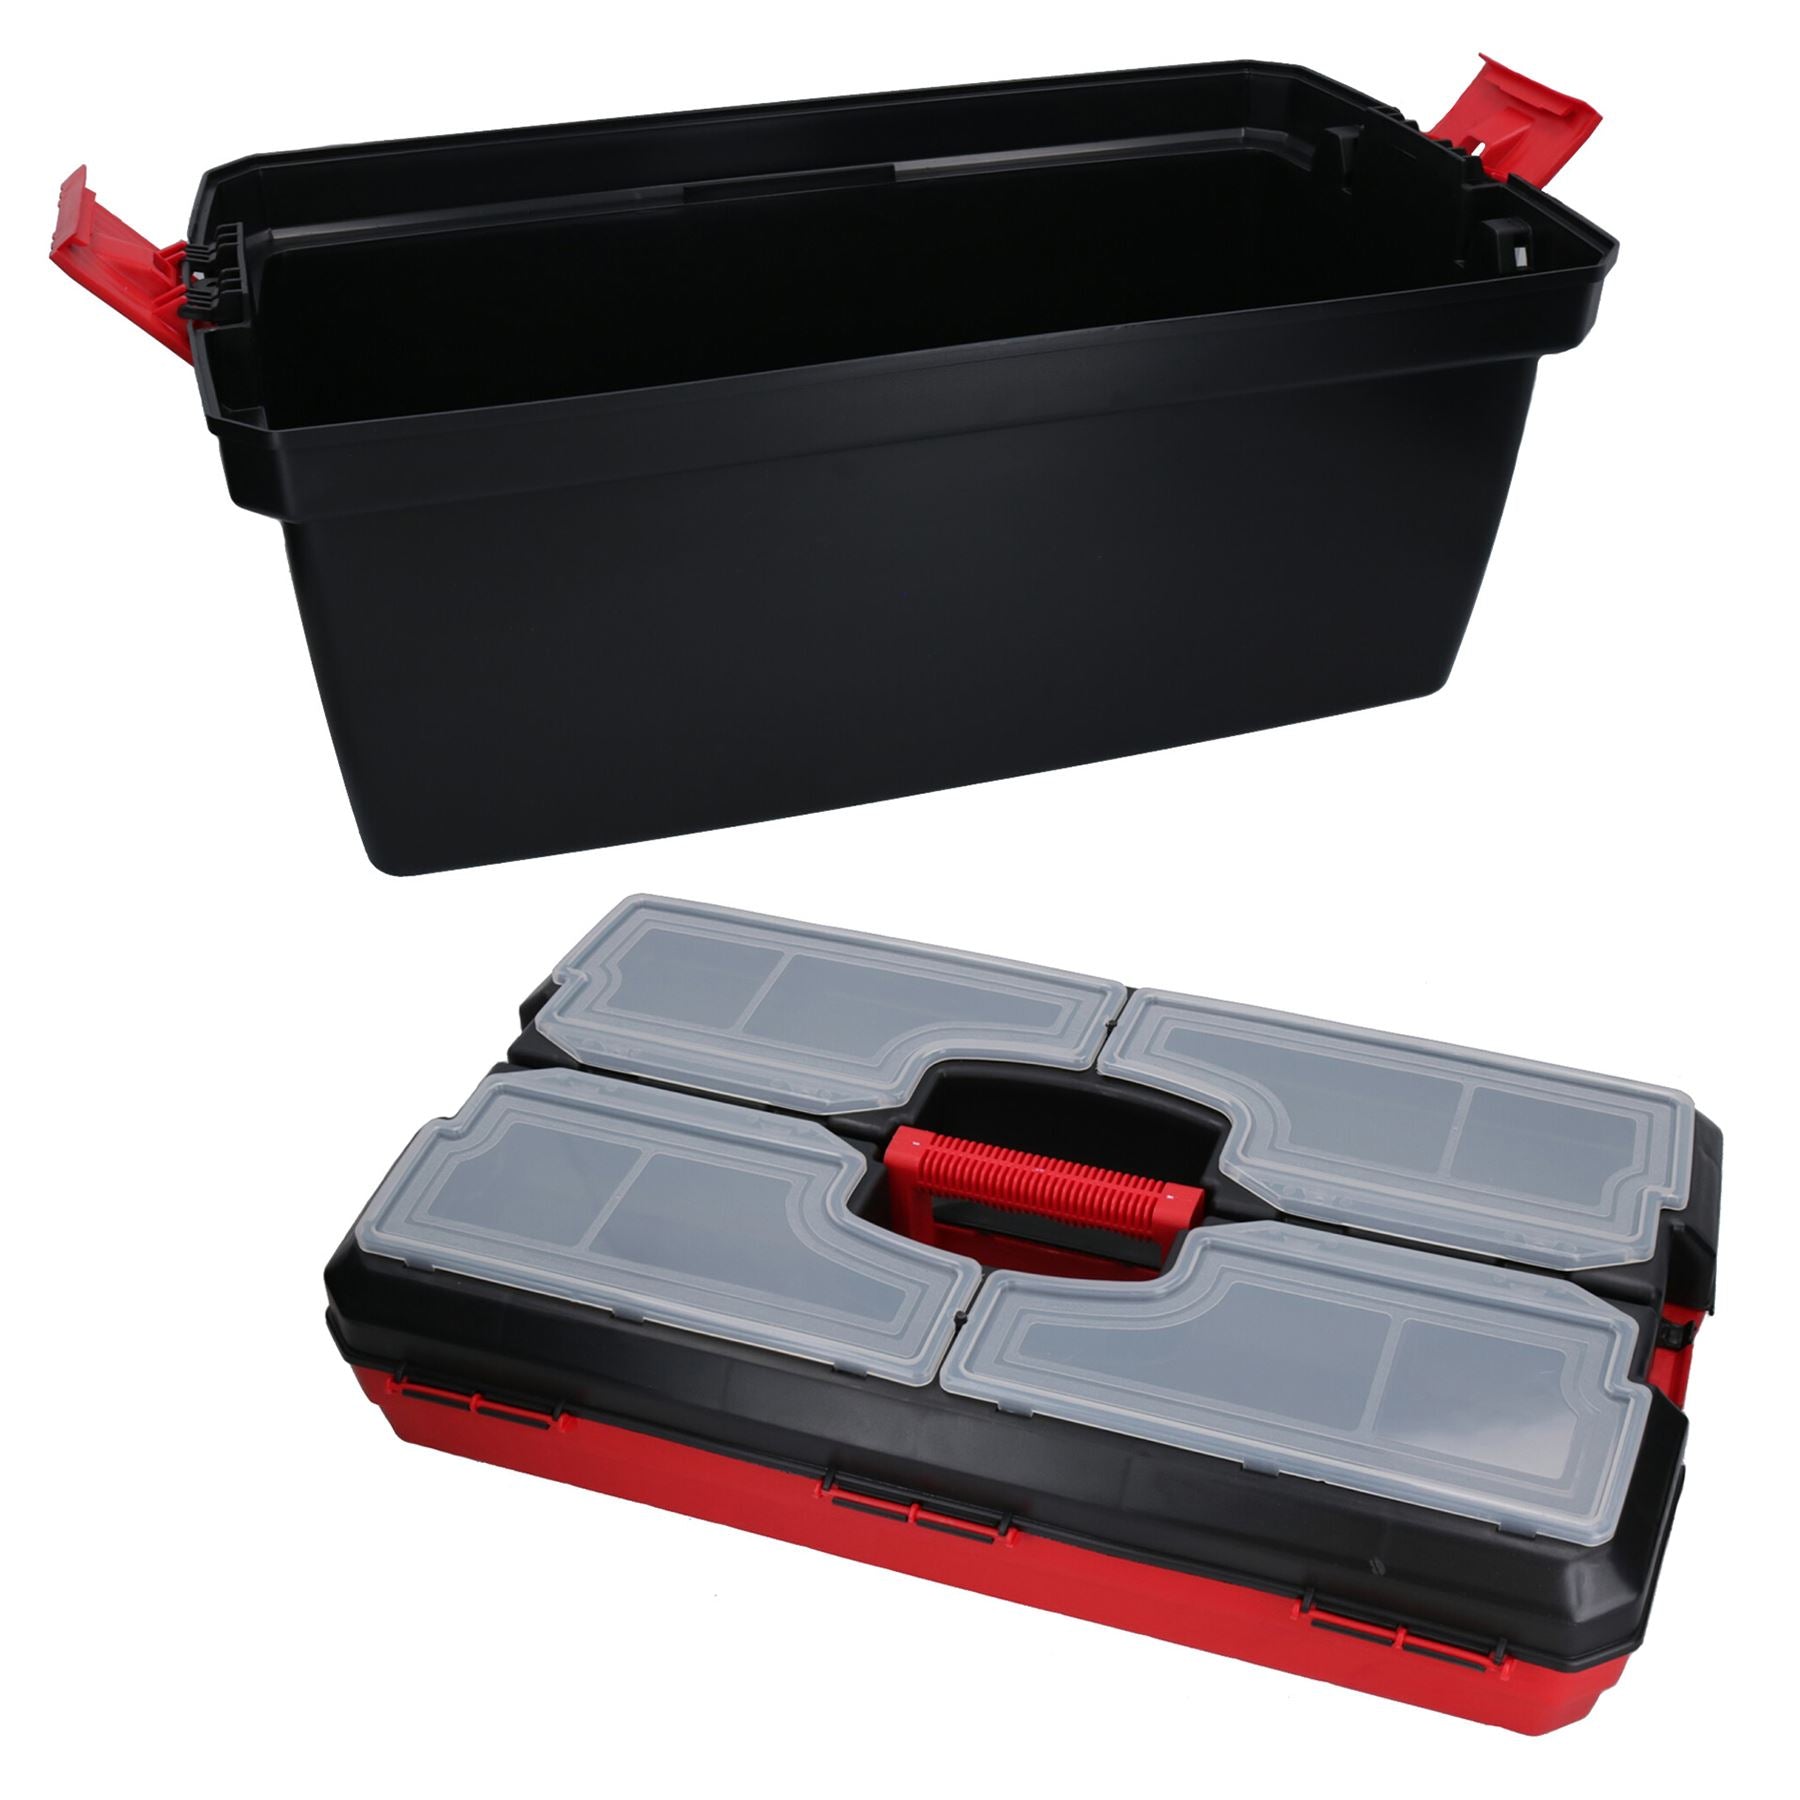 24” Large Maestro Toolbox Carry Case Storage Box With handle + Compartments